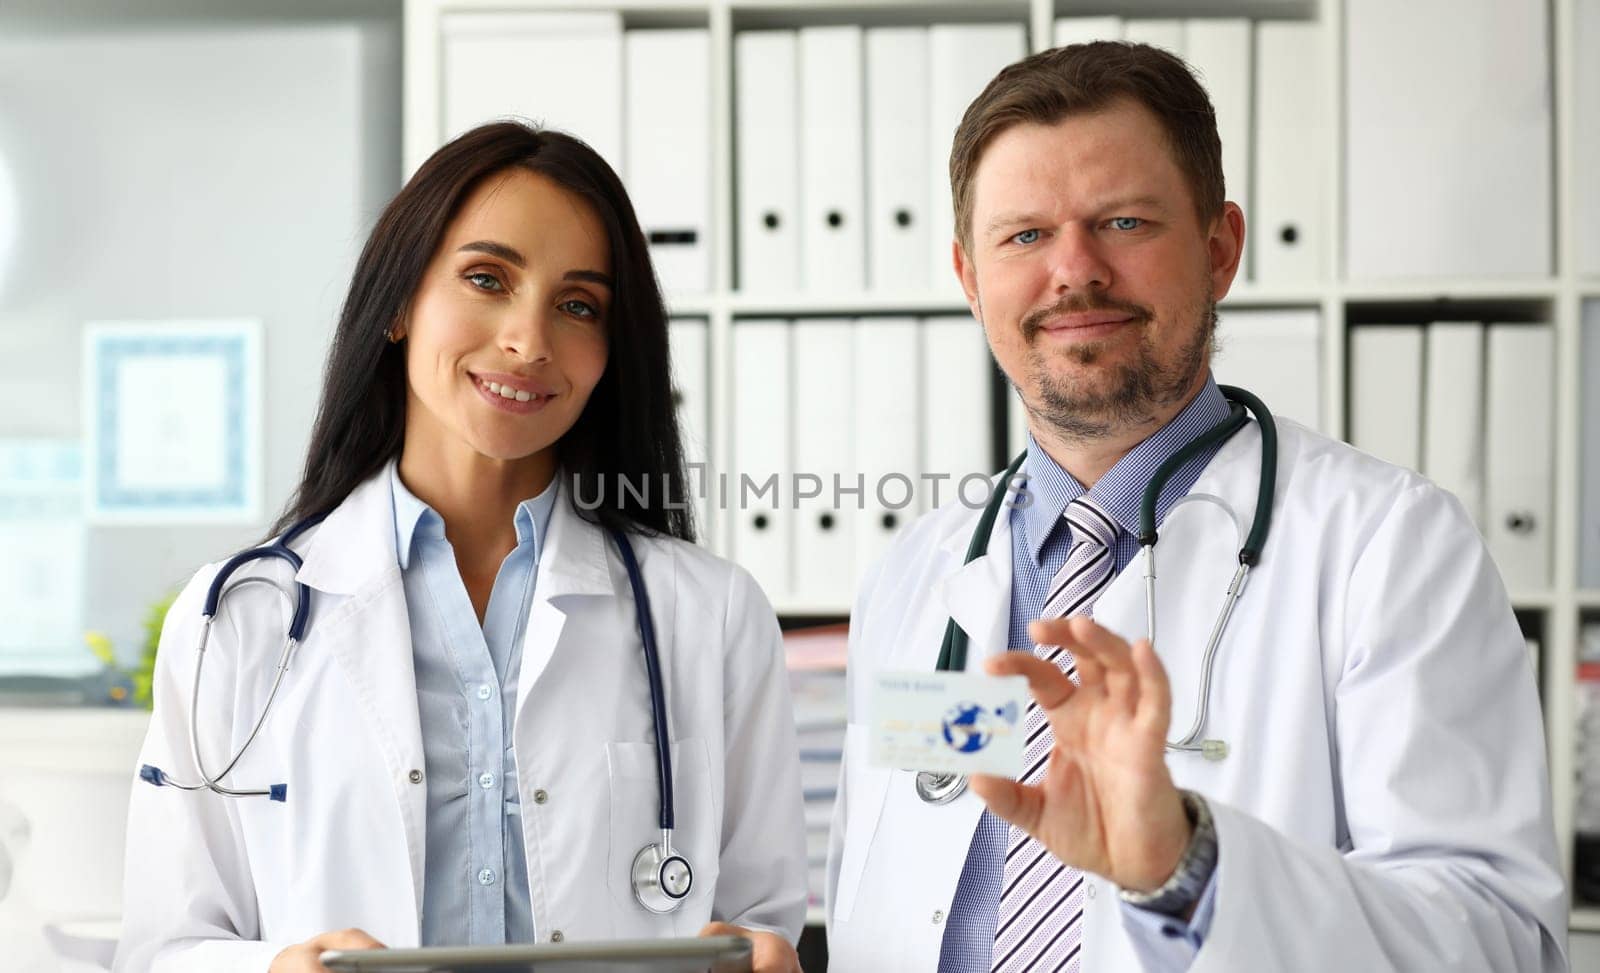 Group of smiling mature caucasian doctors offering special plastic card for medical services sale portrait